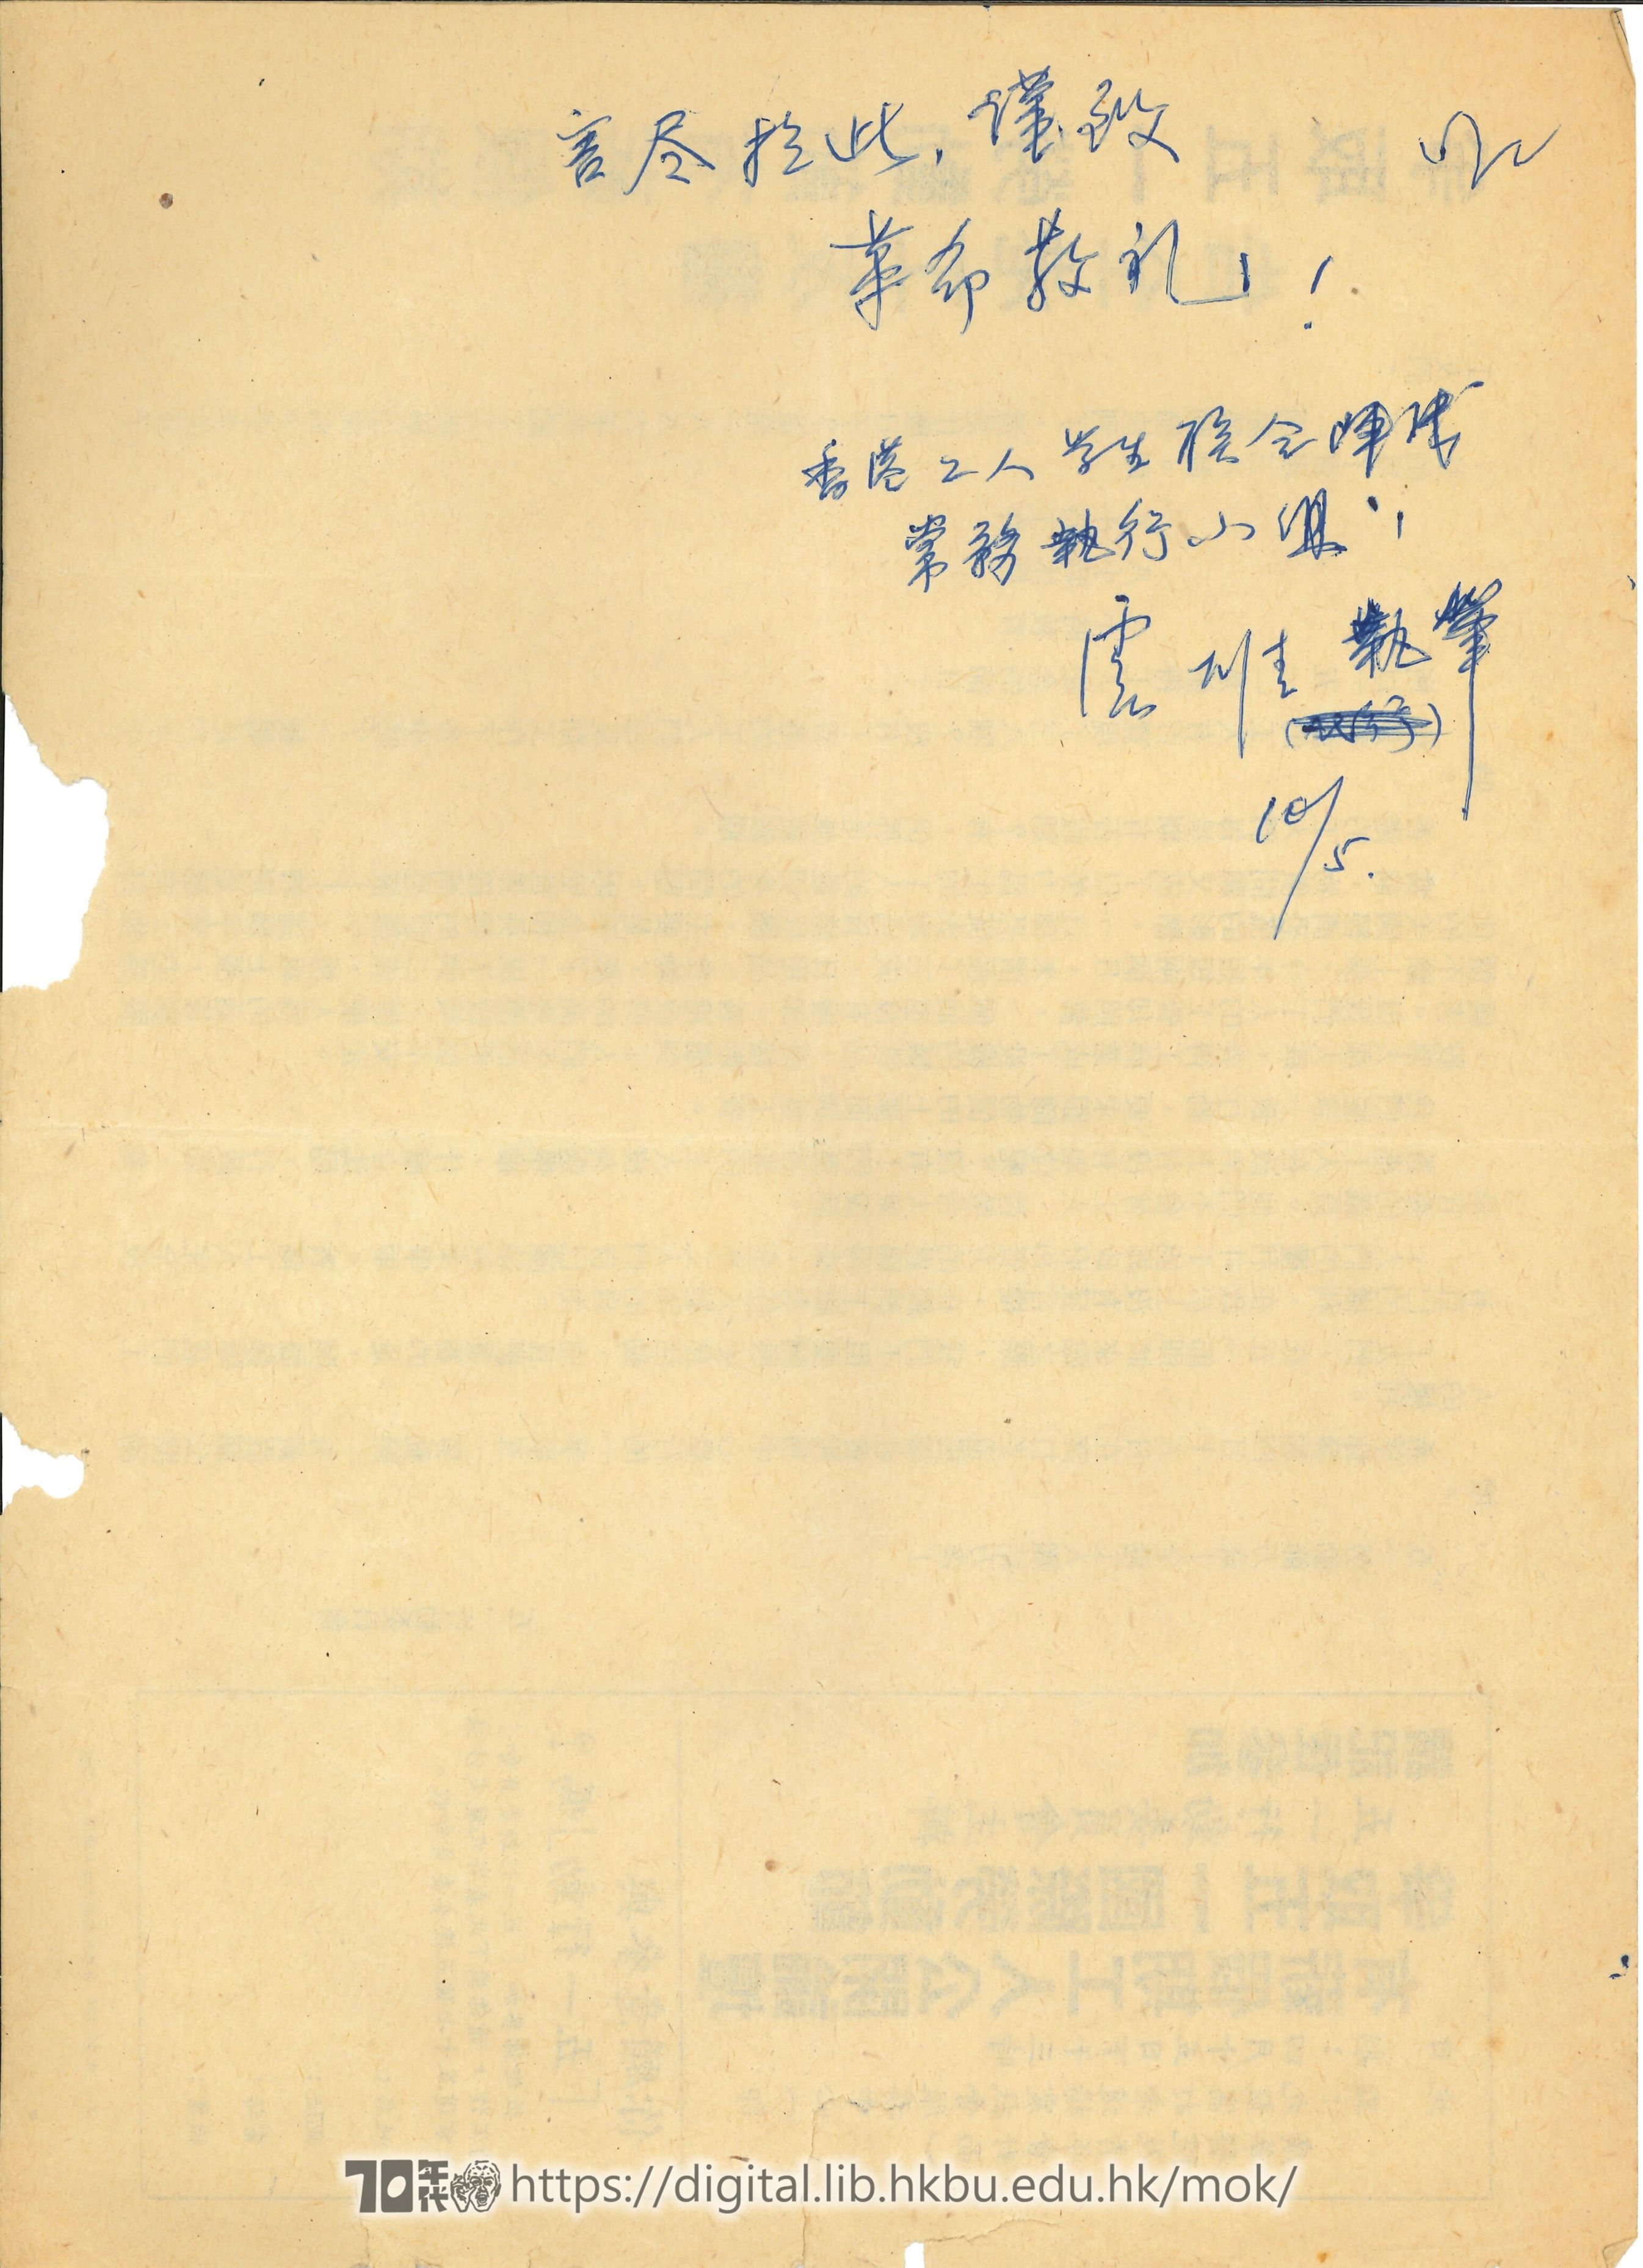   Letter signed by United Front to Ng Chung Yin 香港工人學生聯會陣線常務執行小組 